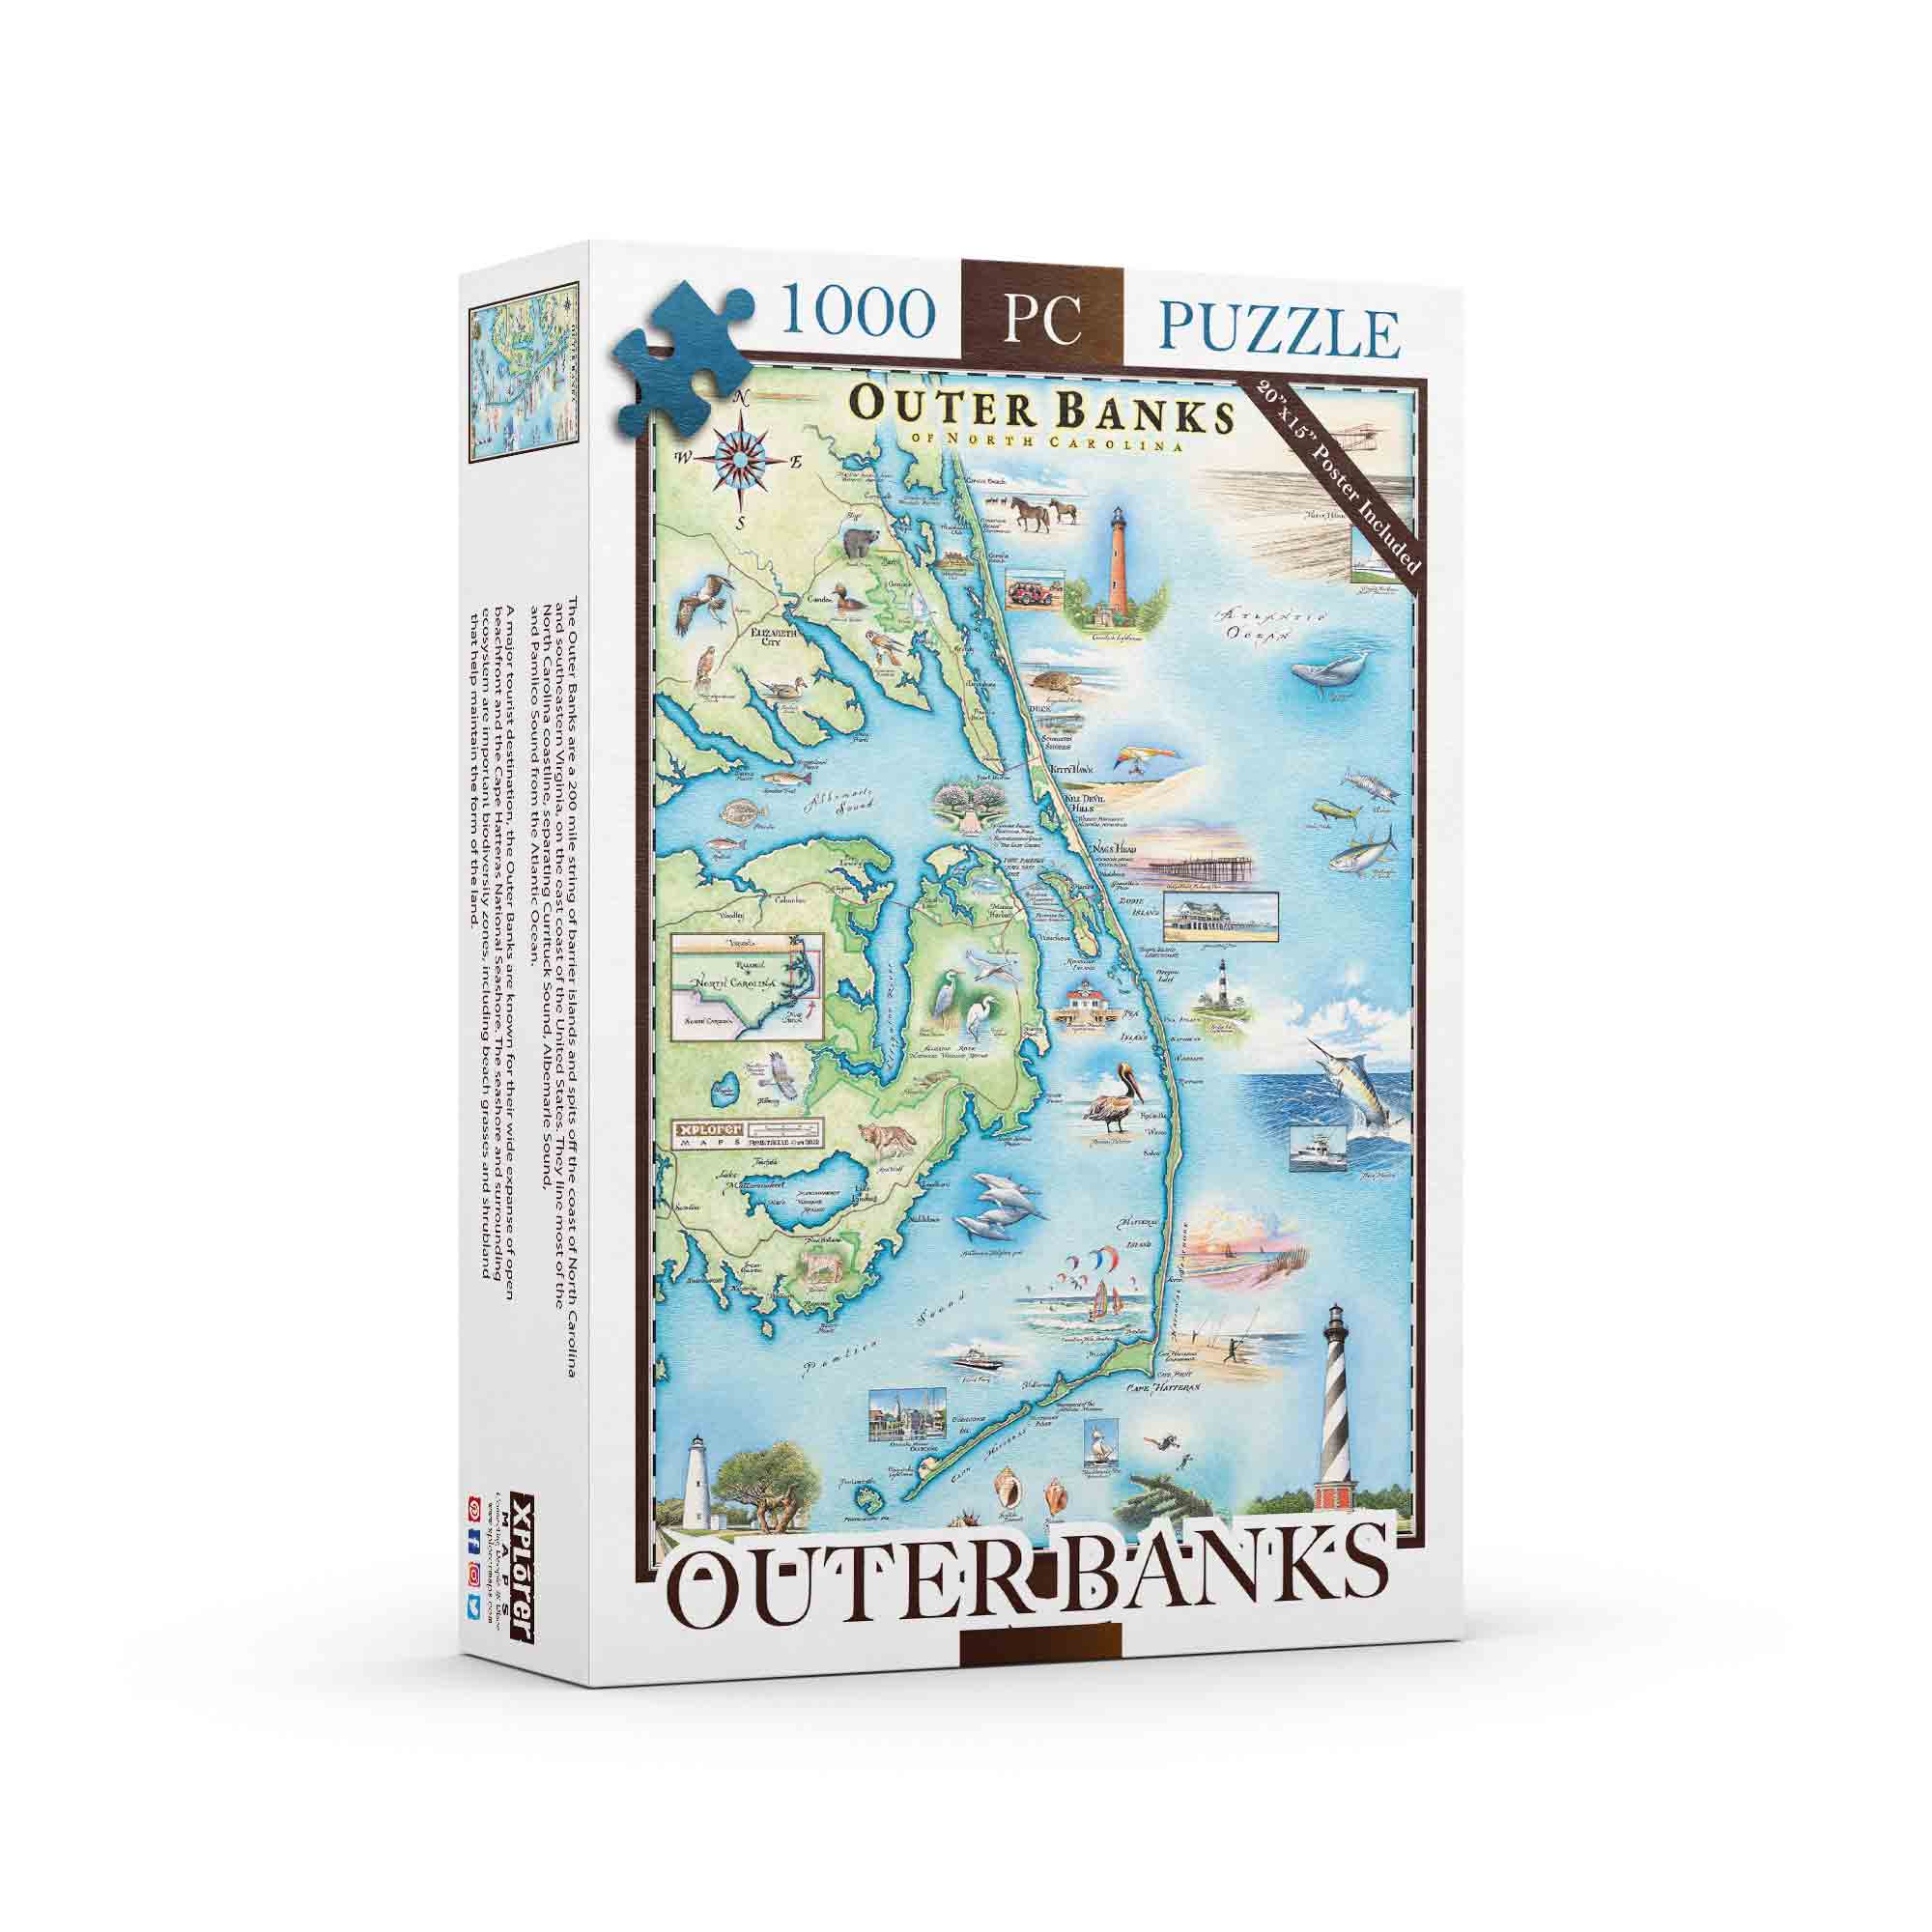 Outer Banks, North Carolina, 1000-piece jigsaw puzzle showcasing serene beach scenes, iconic lighthouses, and vibrant marine life. Ideal for beach outings and everyday adventures in North Carolina.